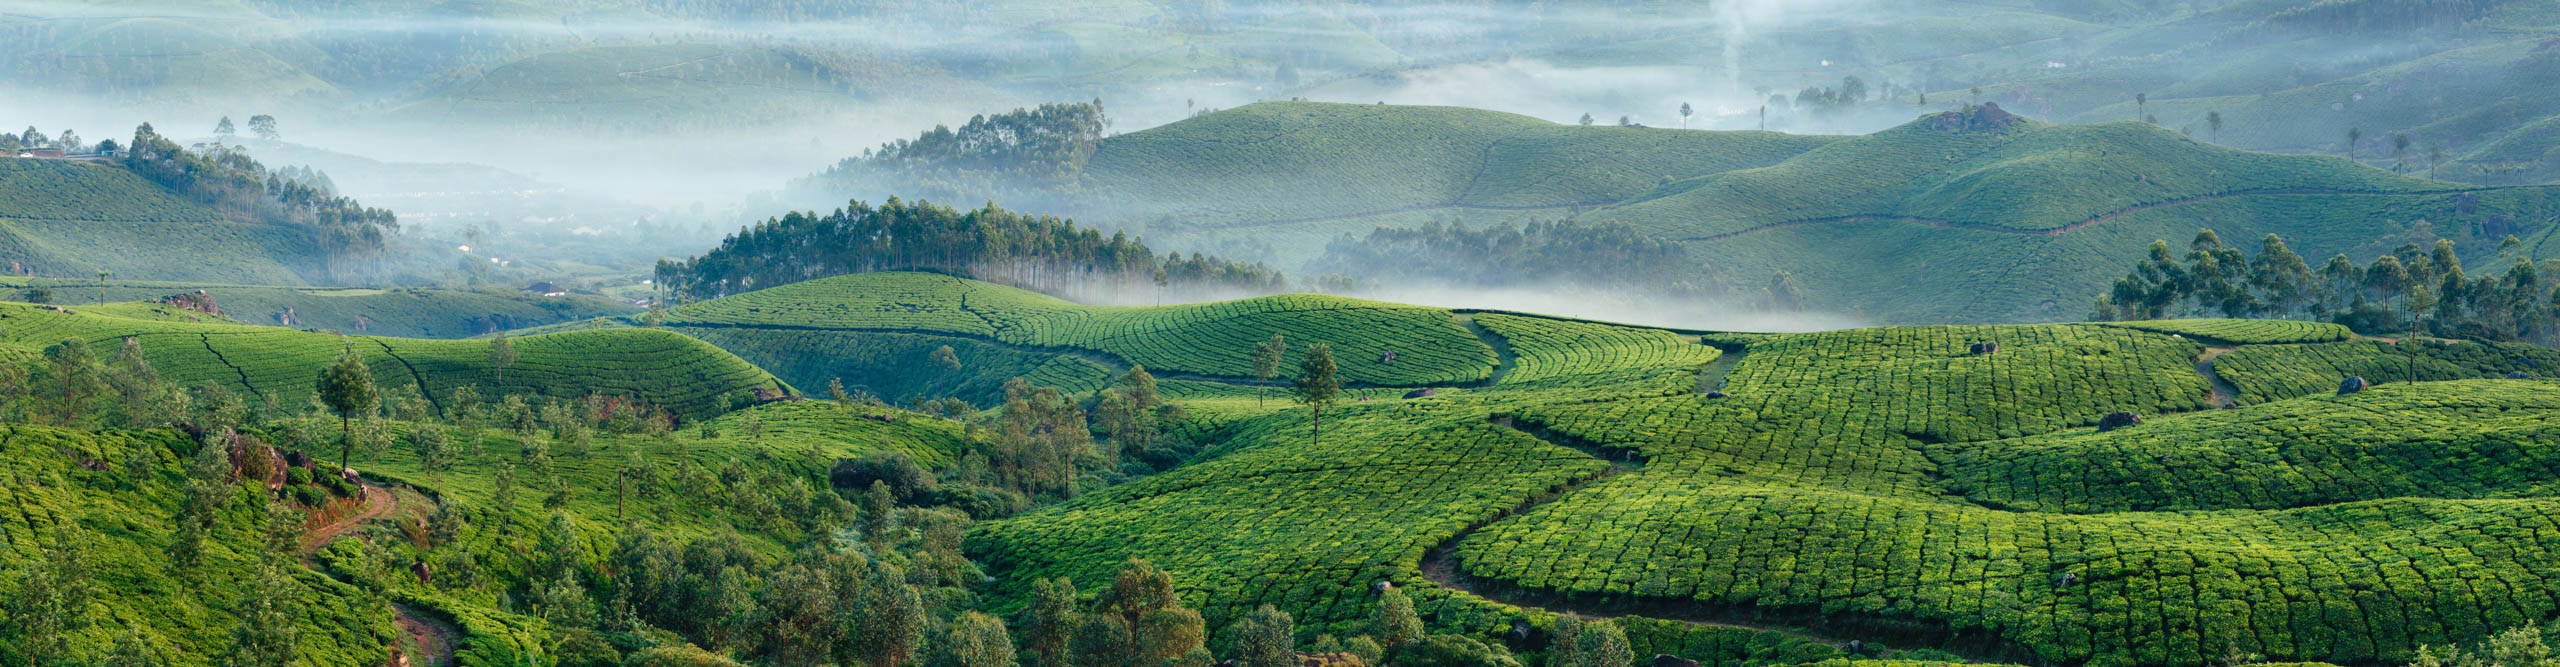 Misty munnar tea plantations over the rolling hills in early morning at sunrise, Kerala, India